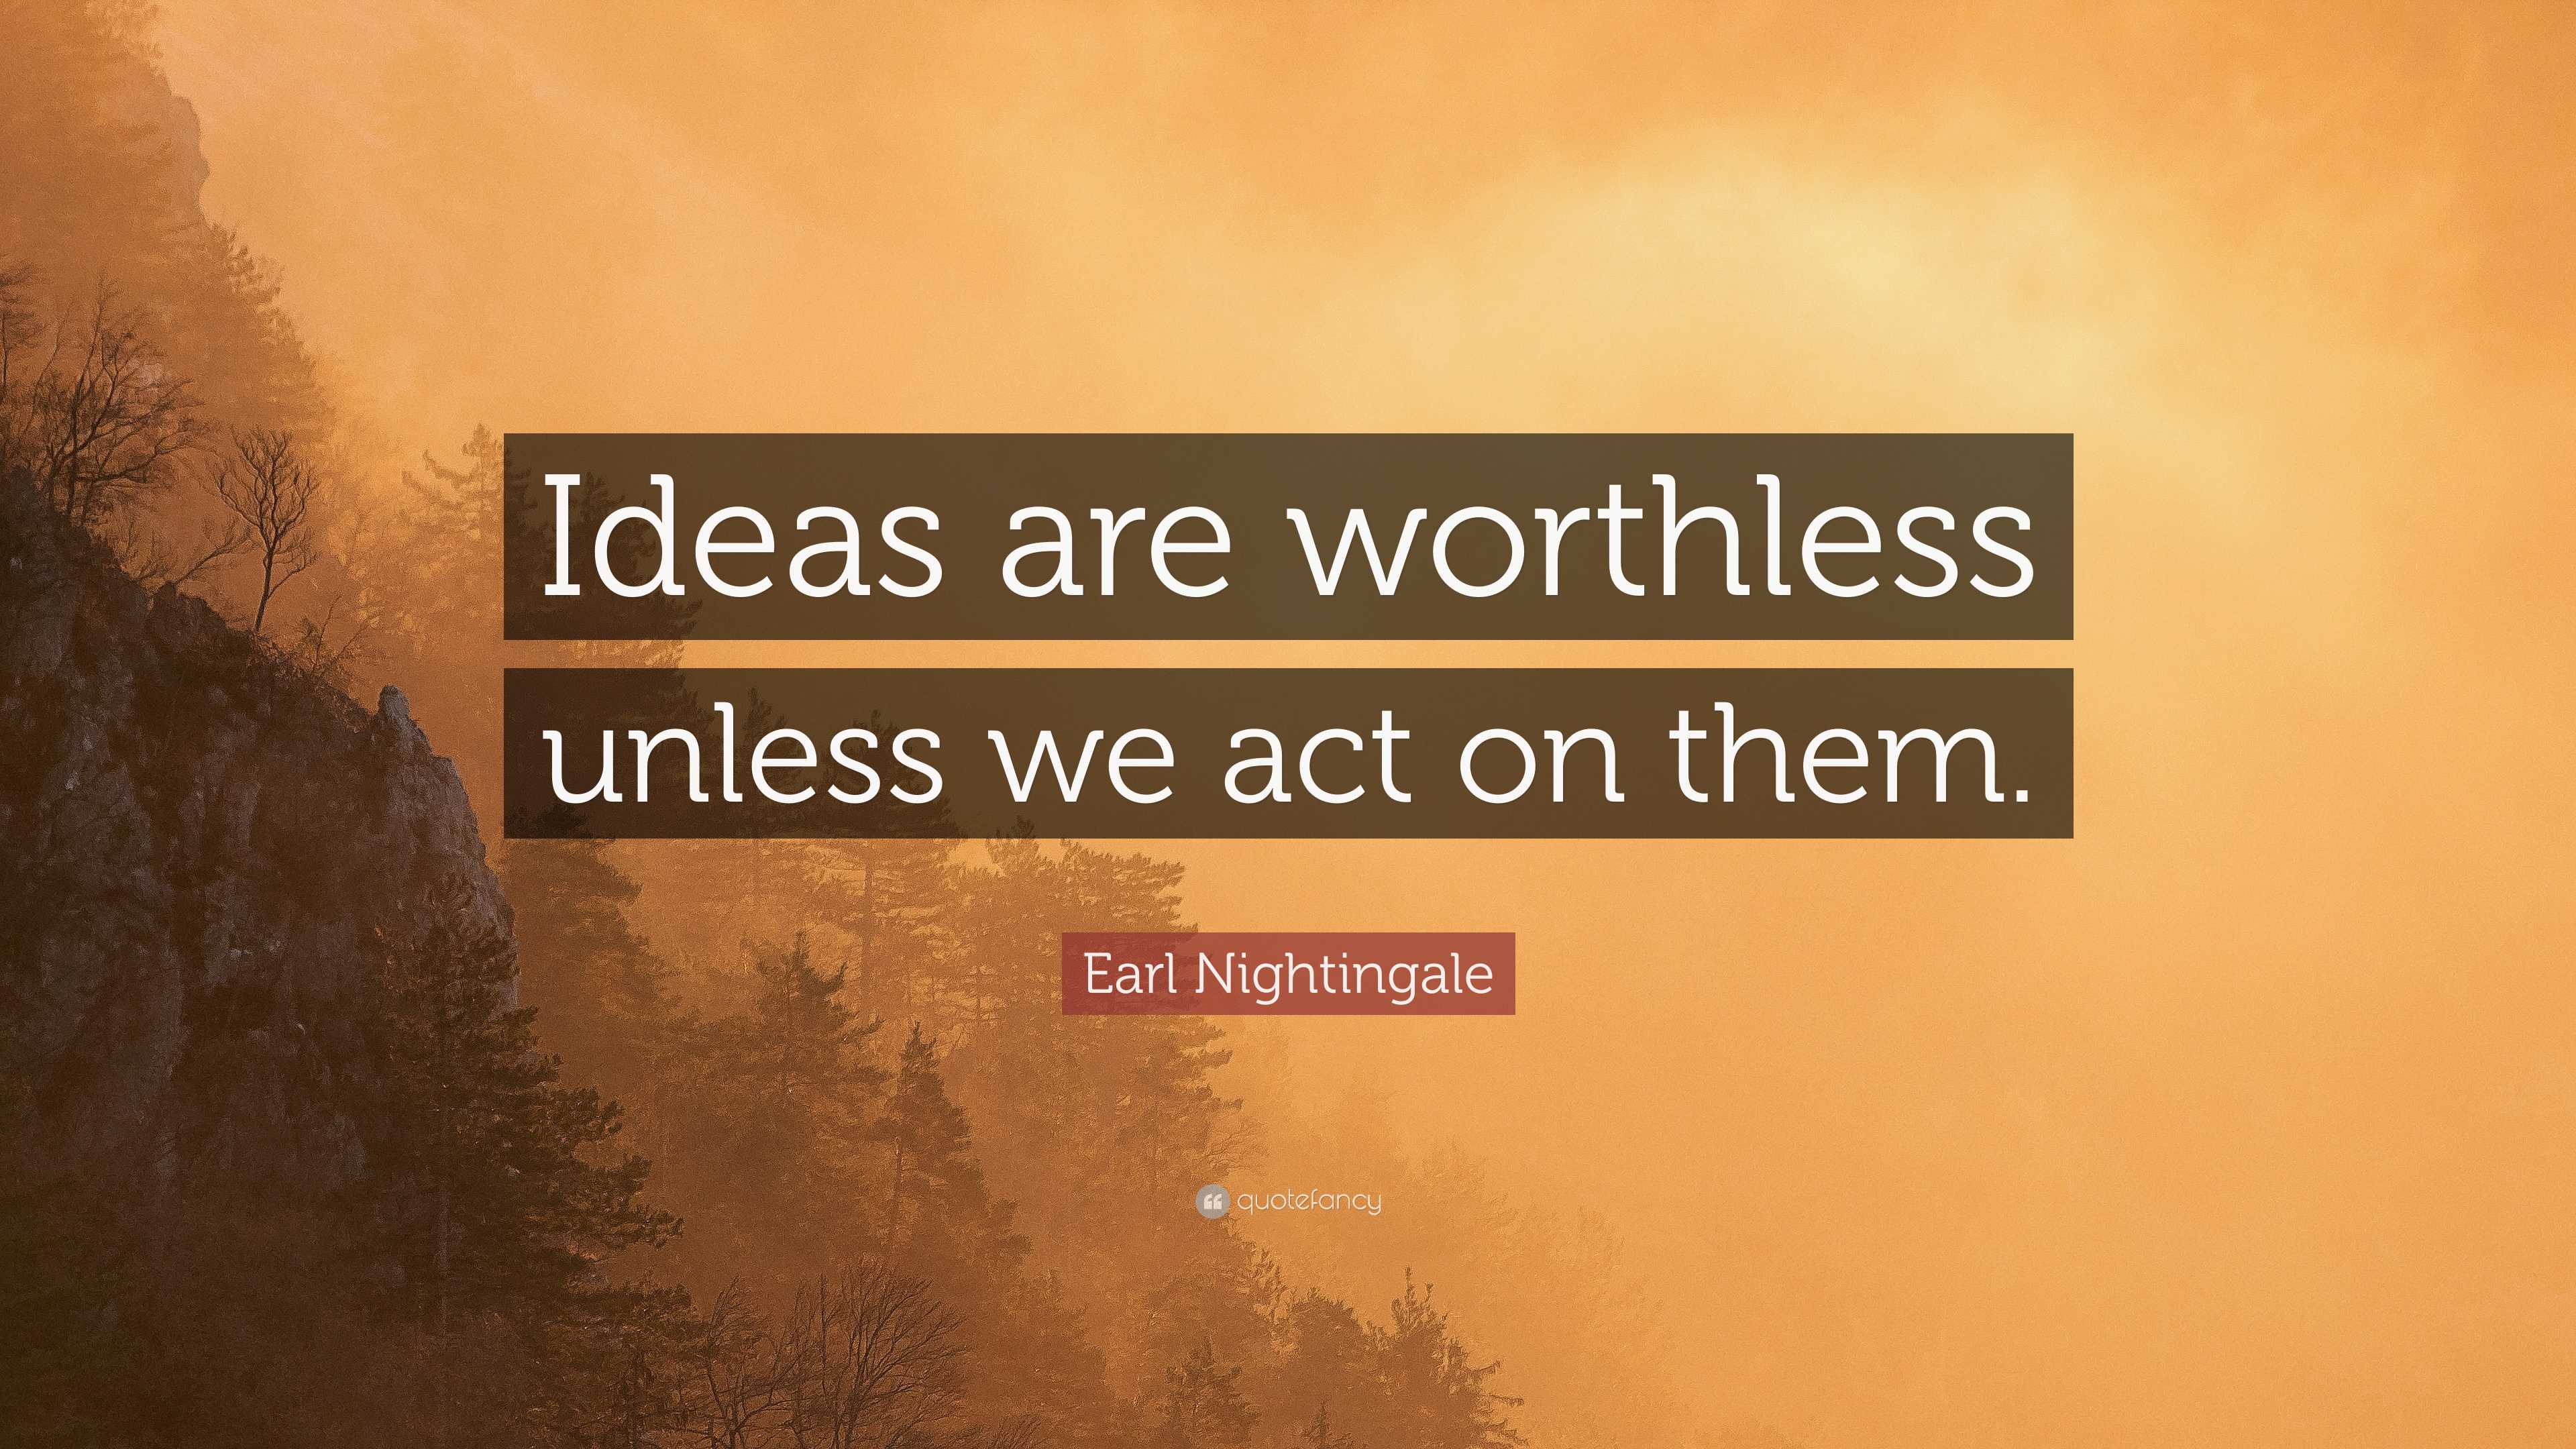 Earl Nightingale Quote: “Ideas are worthless unless we act on them.”